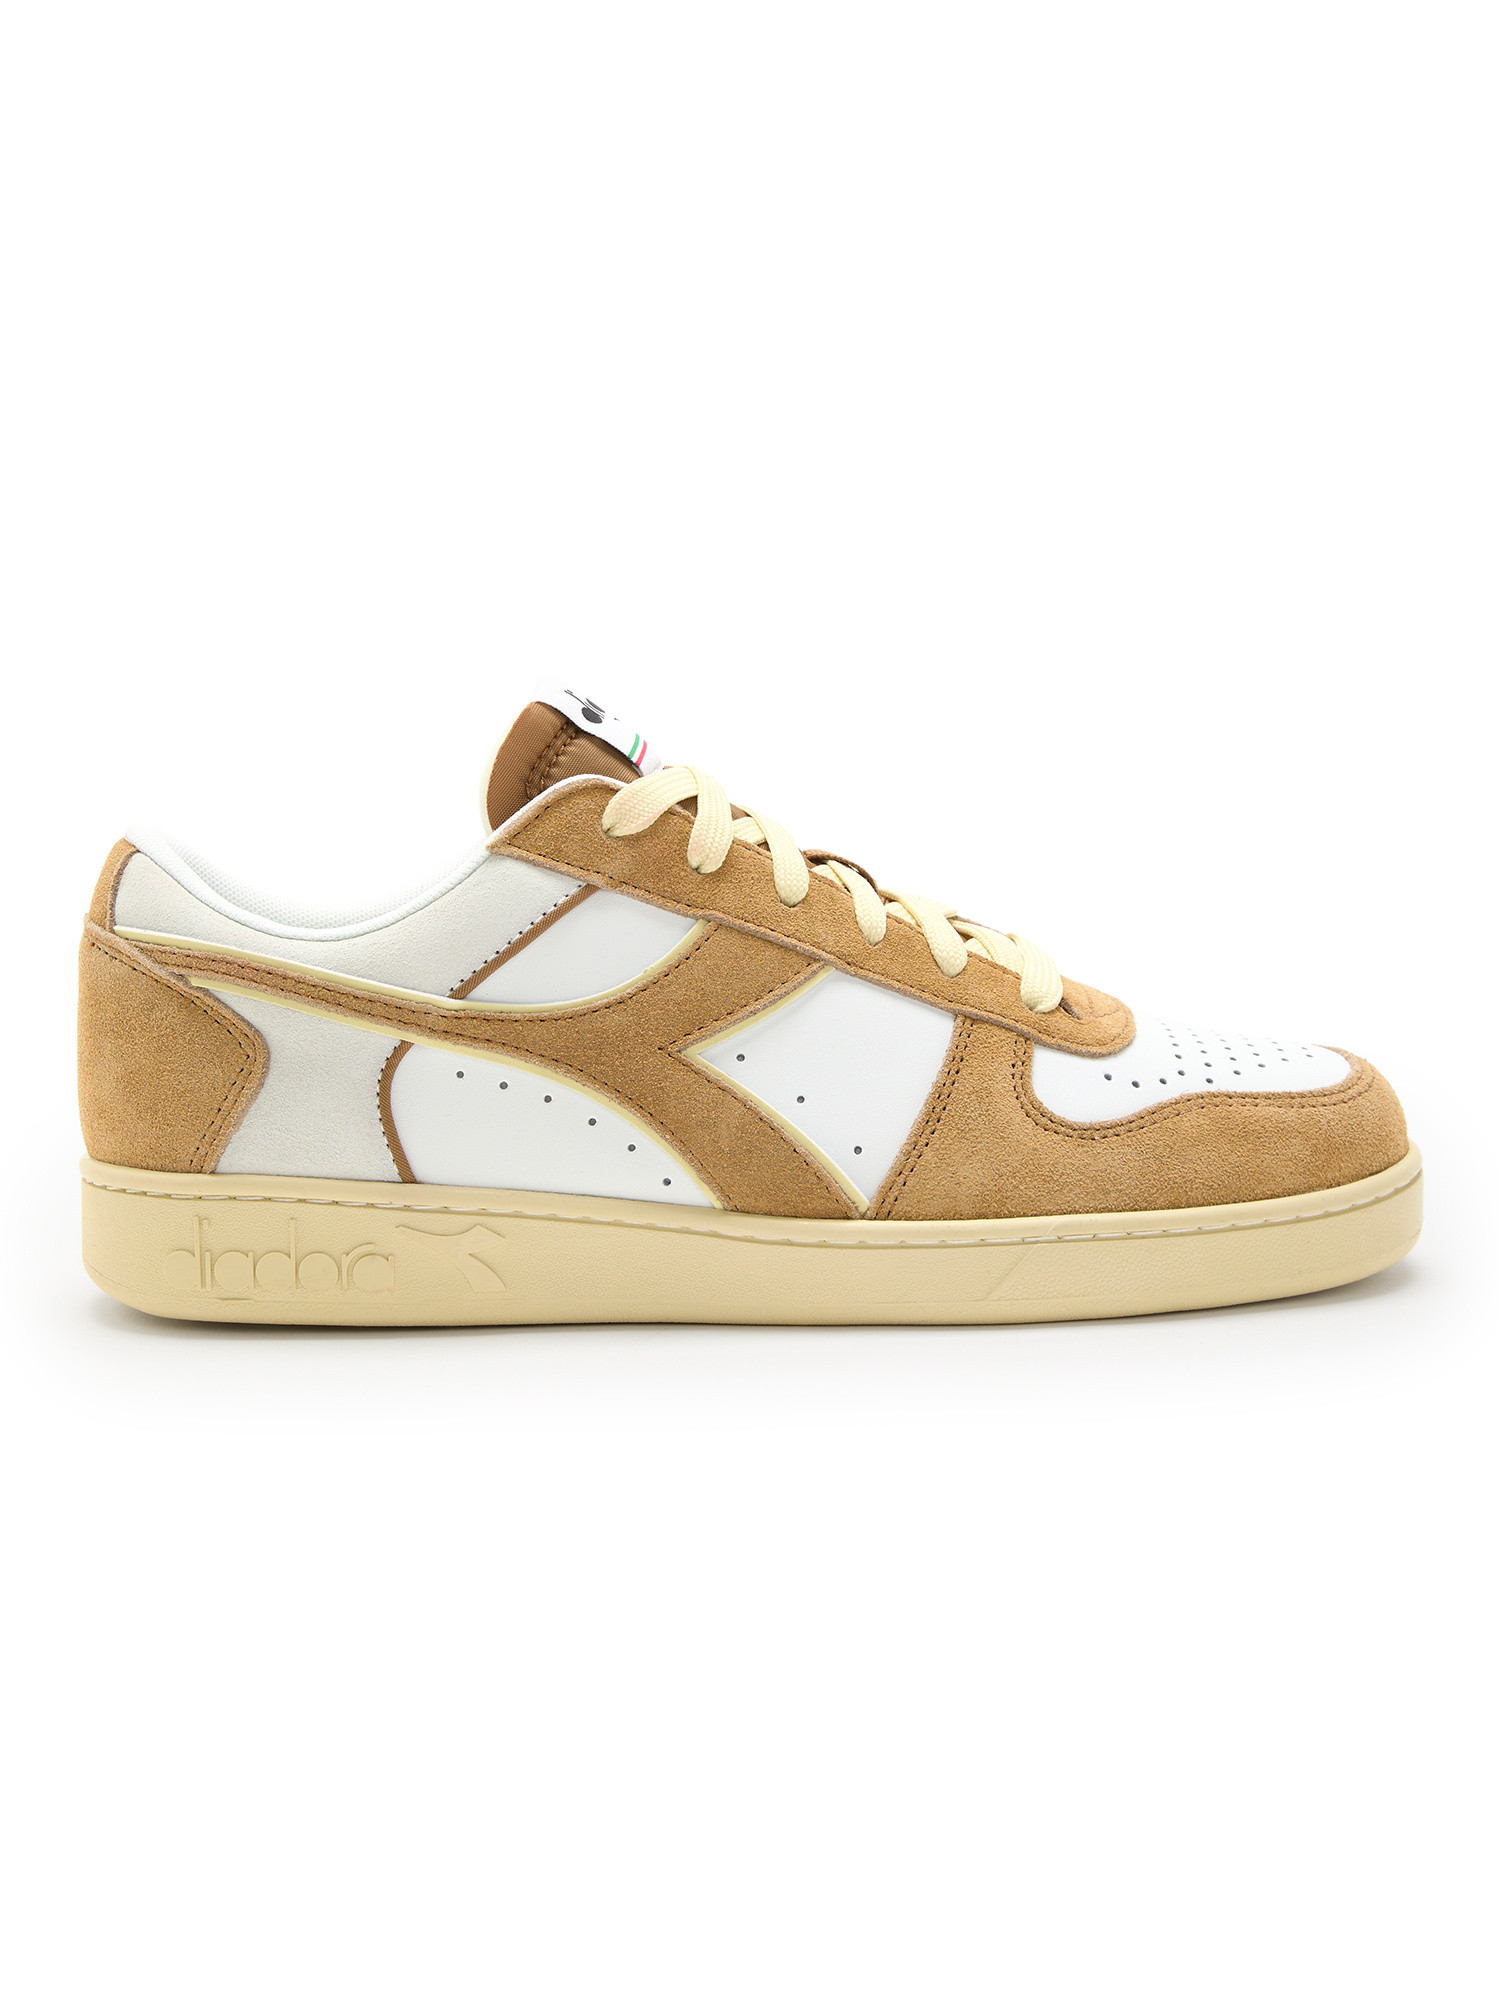 Diadora - Magic Basket Low Suede Leather Shoes, White, large image number 0